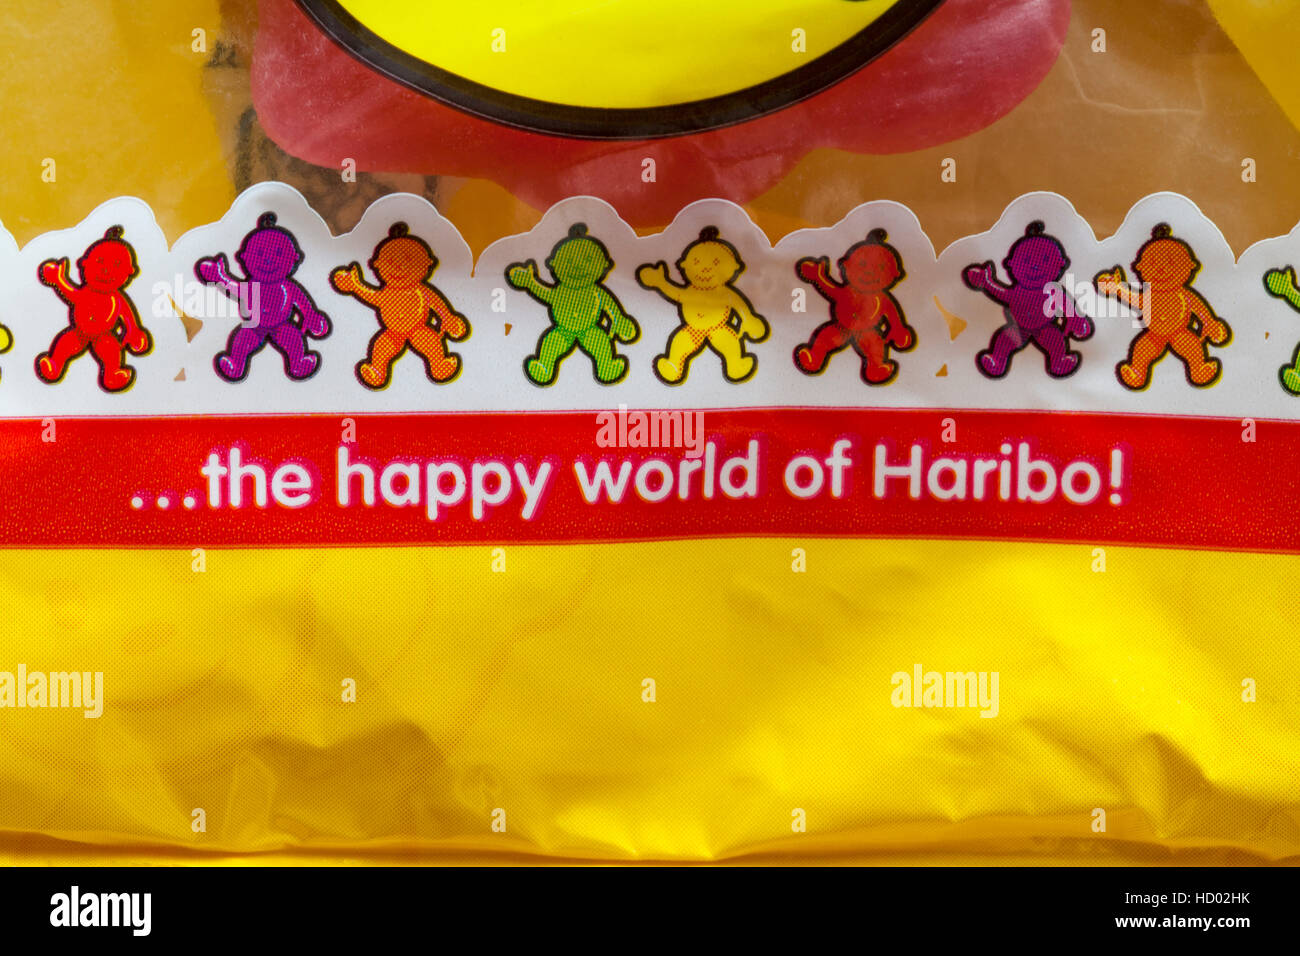 the happy world of Haribo - detail on packet of Haribo Jelly Babies Stock Photo